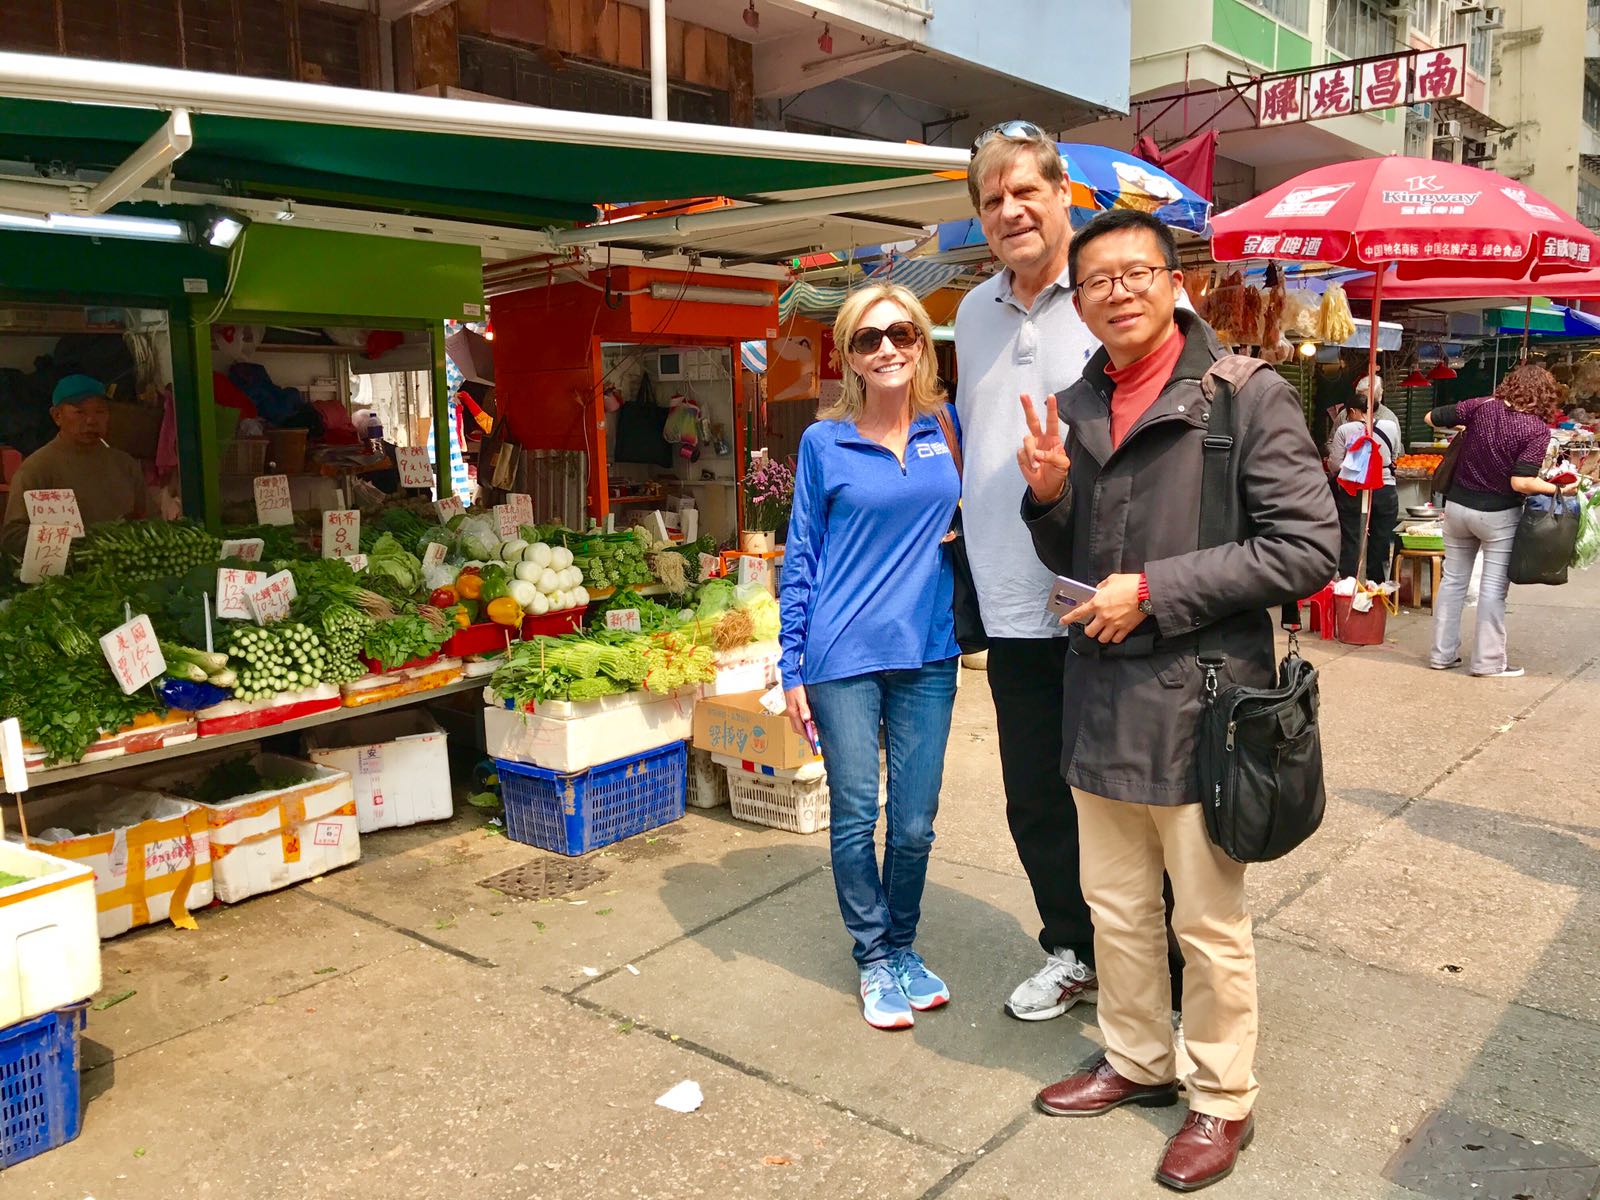 Frank the tour guide with Michael Clark and his wife at Shau Kei Wan Wet Market.